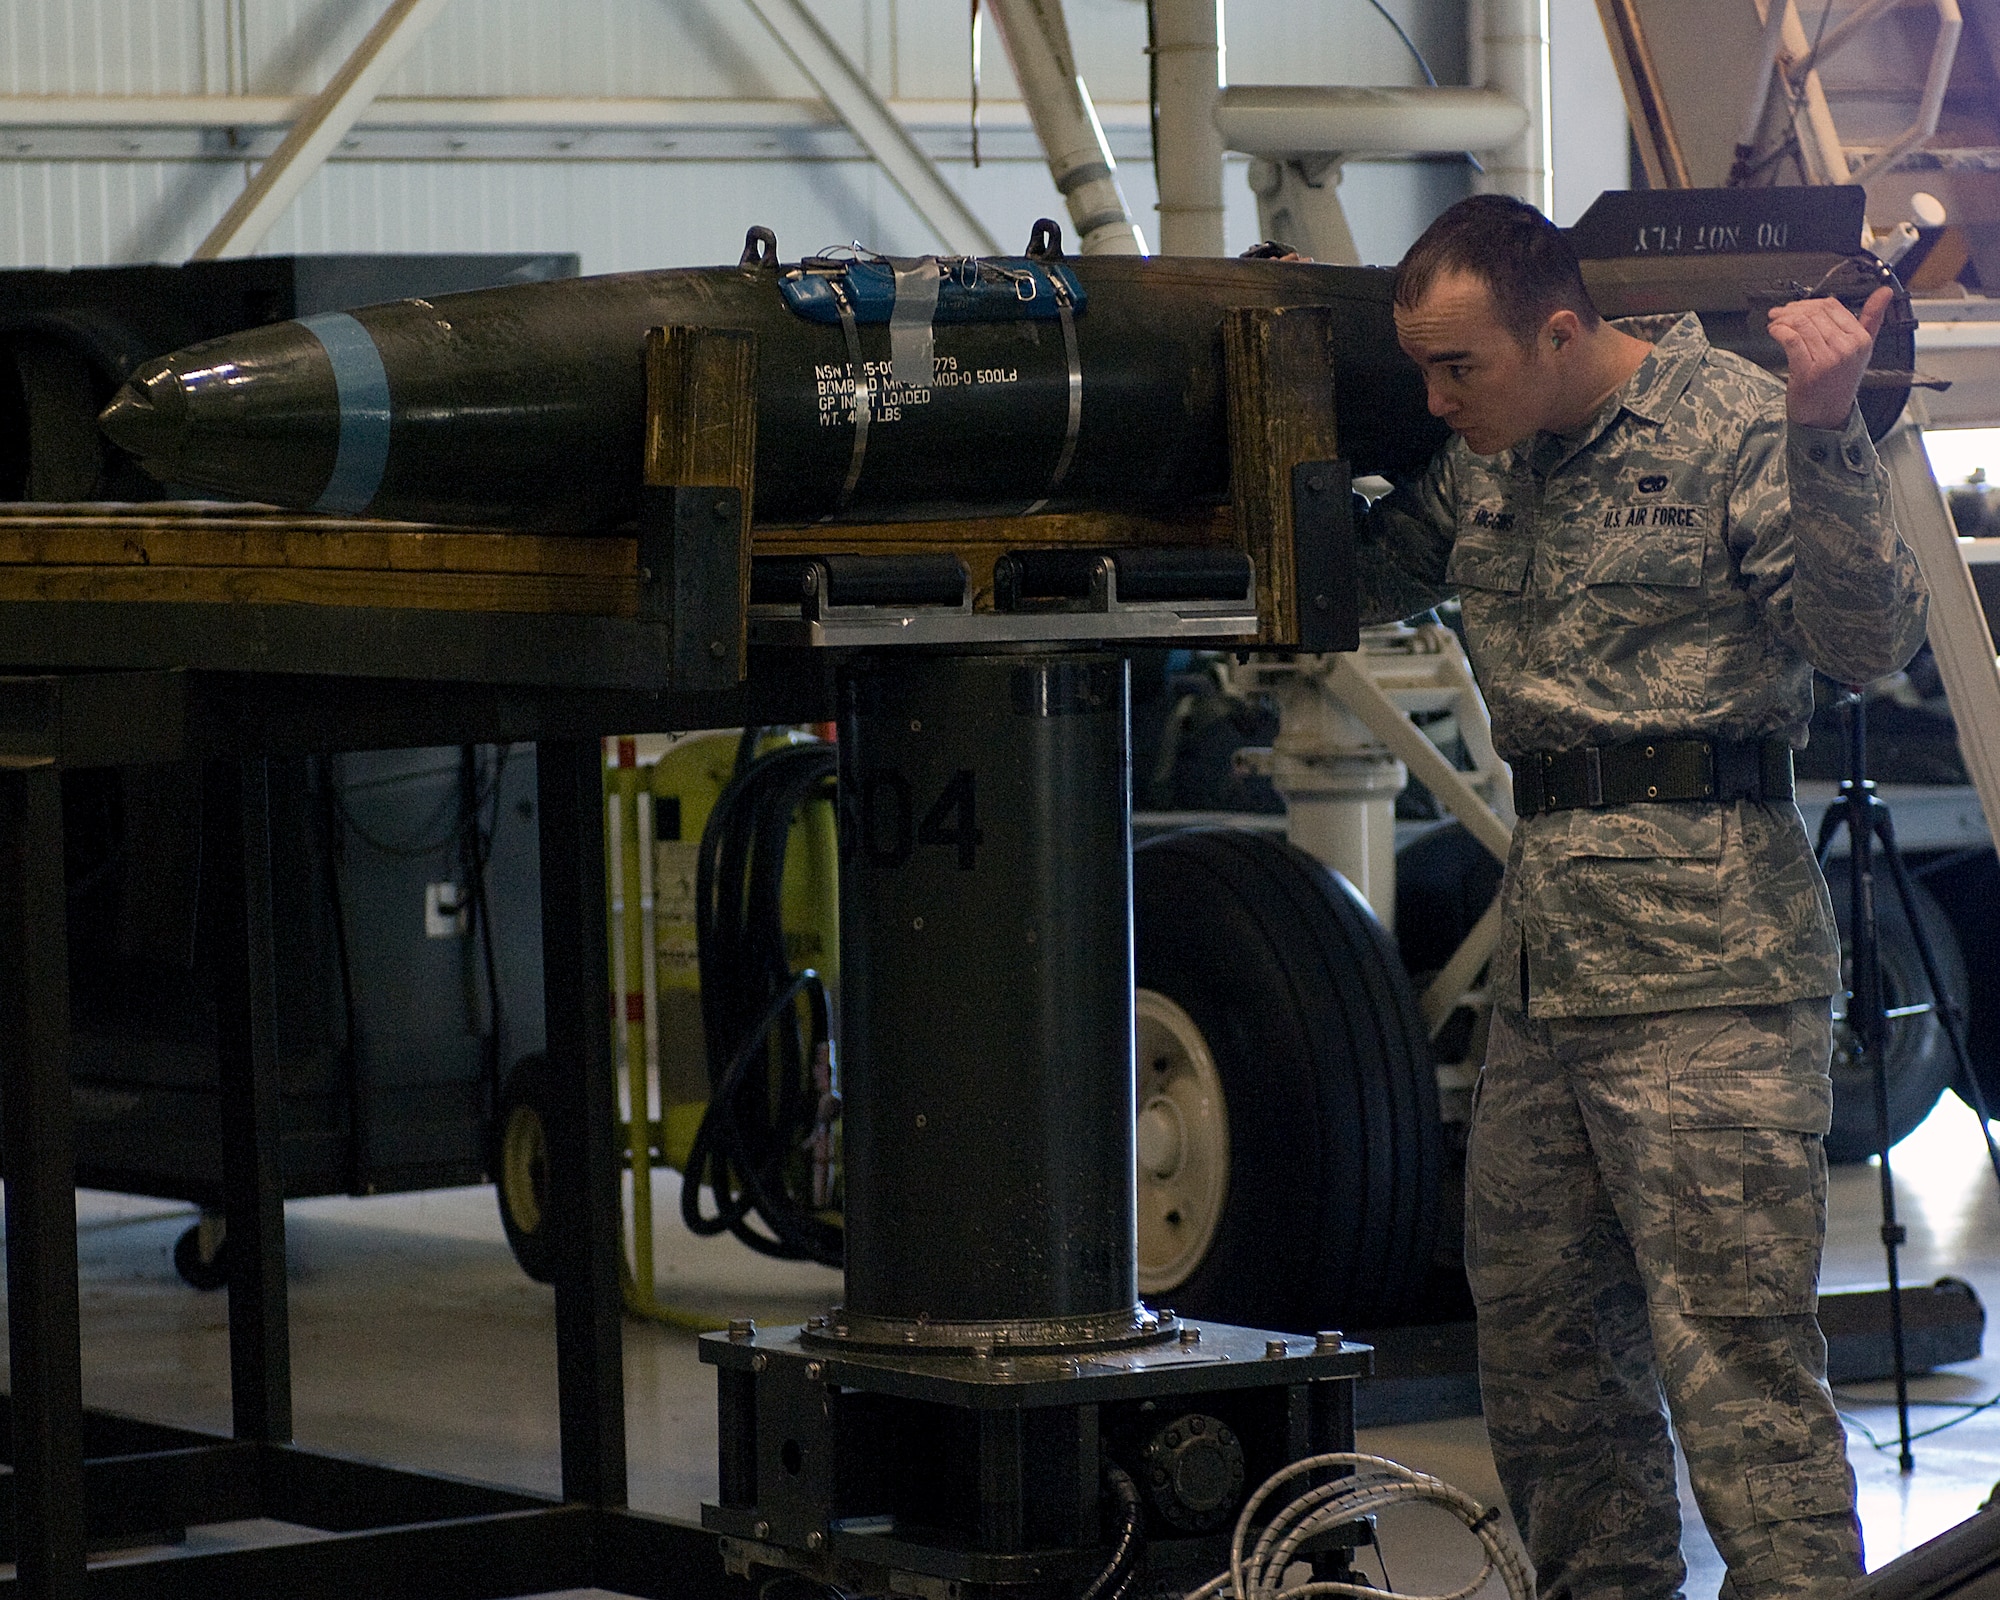 Senior Airman Michael Higgens, 7th Aircraft Maintenance Squadron, directs a MK-82 onto a munitions lift during the Weapons Load Crew of the Year competition Feb. 1, 2013, at Dyess Air Force Base, Texas. The competition was comprised of loading four different munitions into a B-1 simulator while being evaluated on their use of checklists, safety procedures, and overall speed.  (U.S. Air Force photo by Airman 1st Class Kylsee Wisseman/Released)